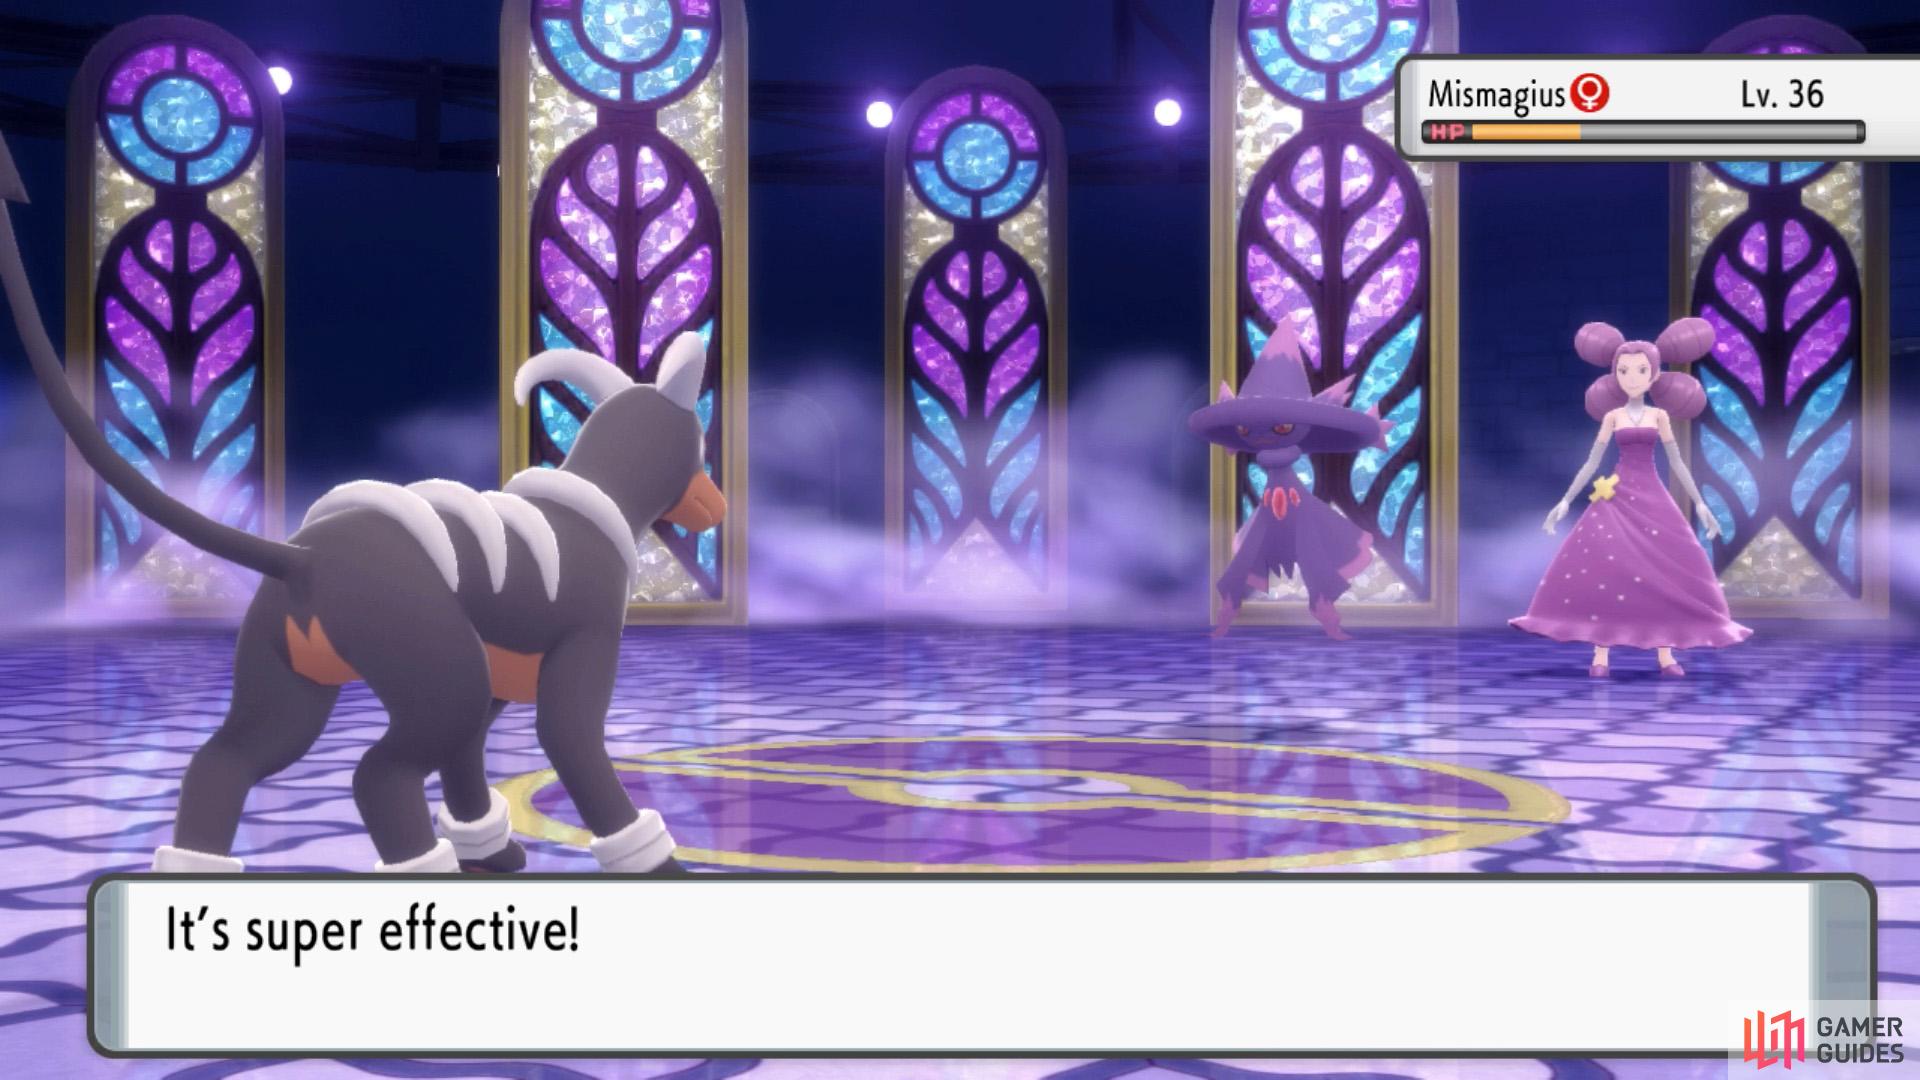 However there are certain Dark-types that it can't overpower.